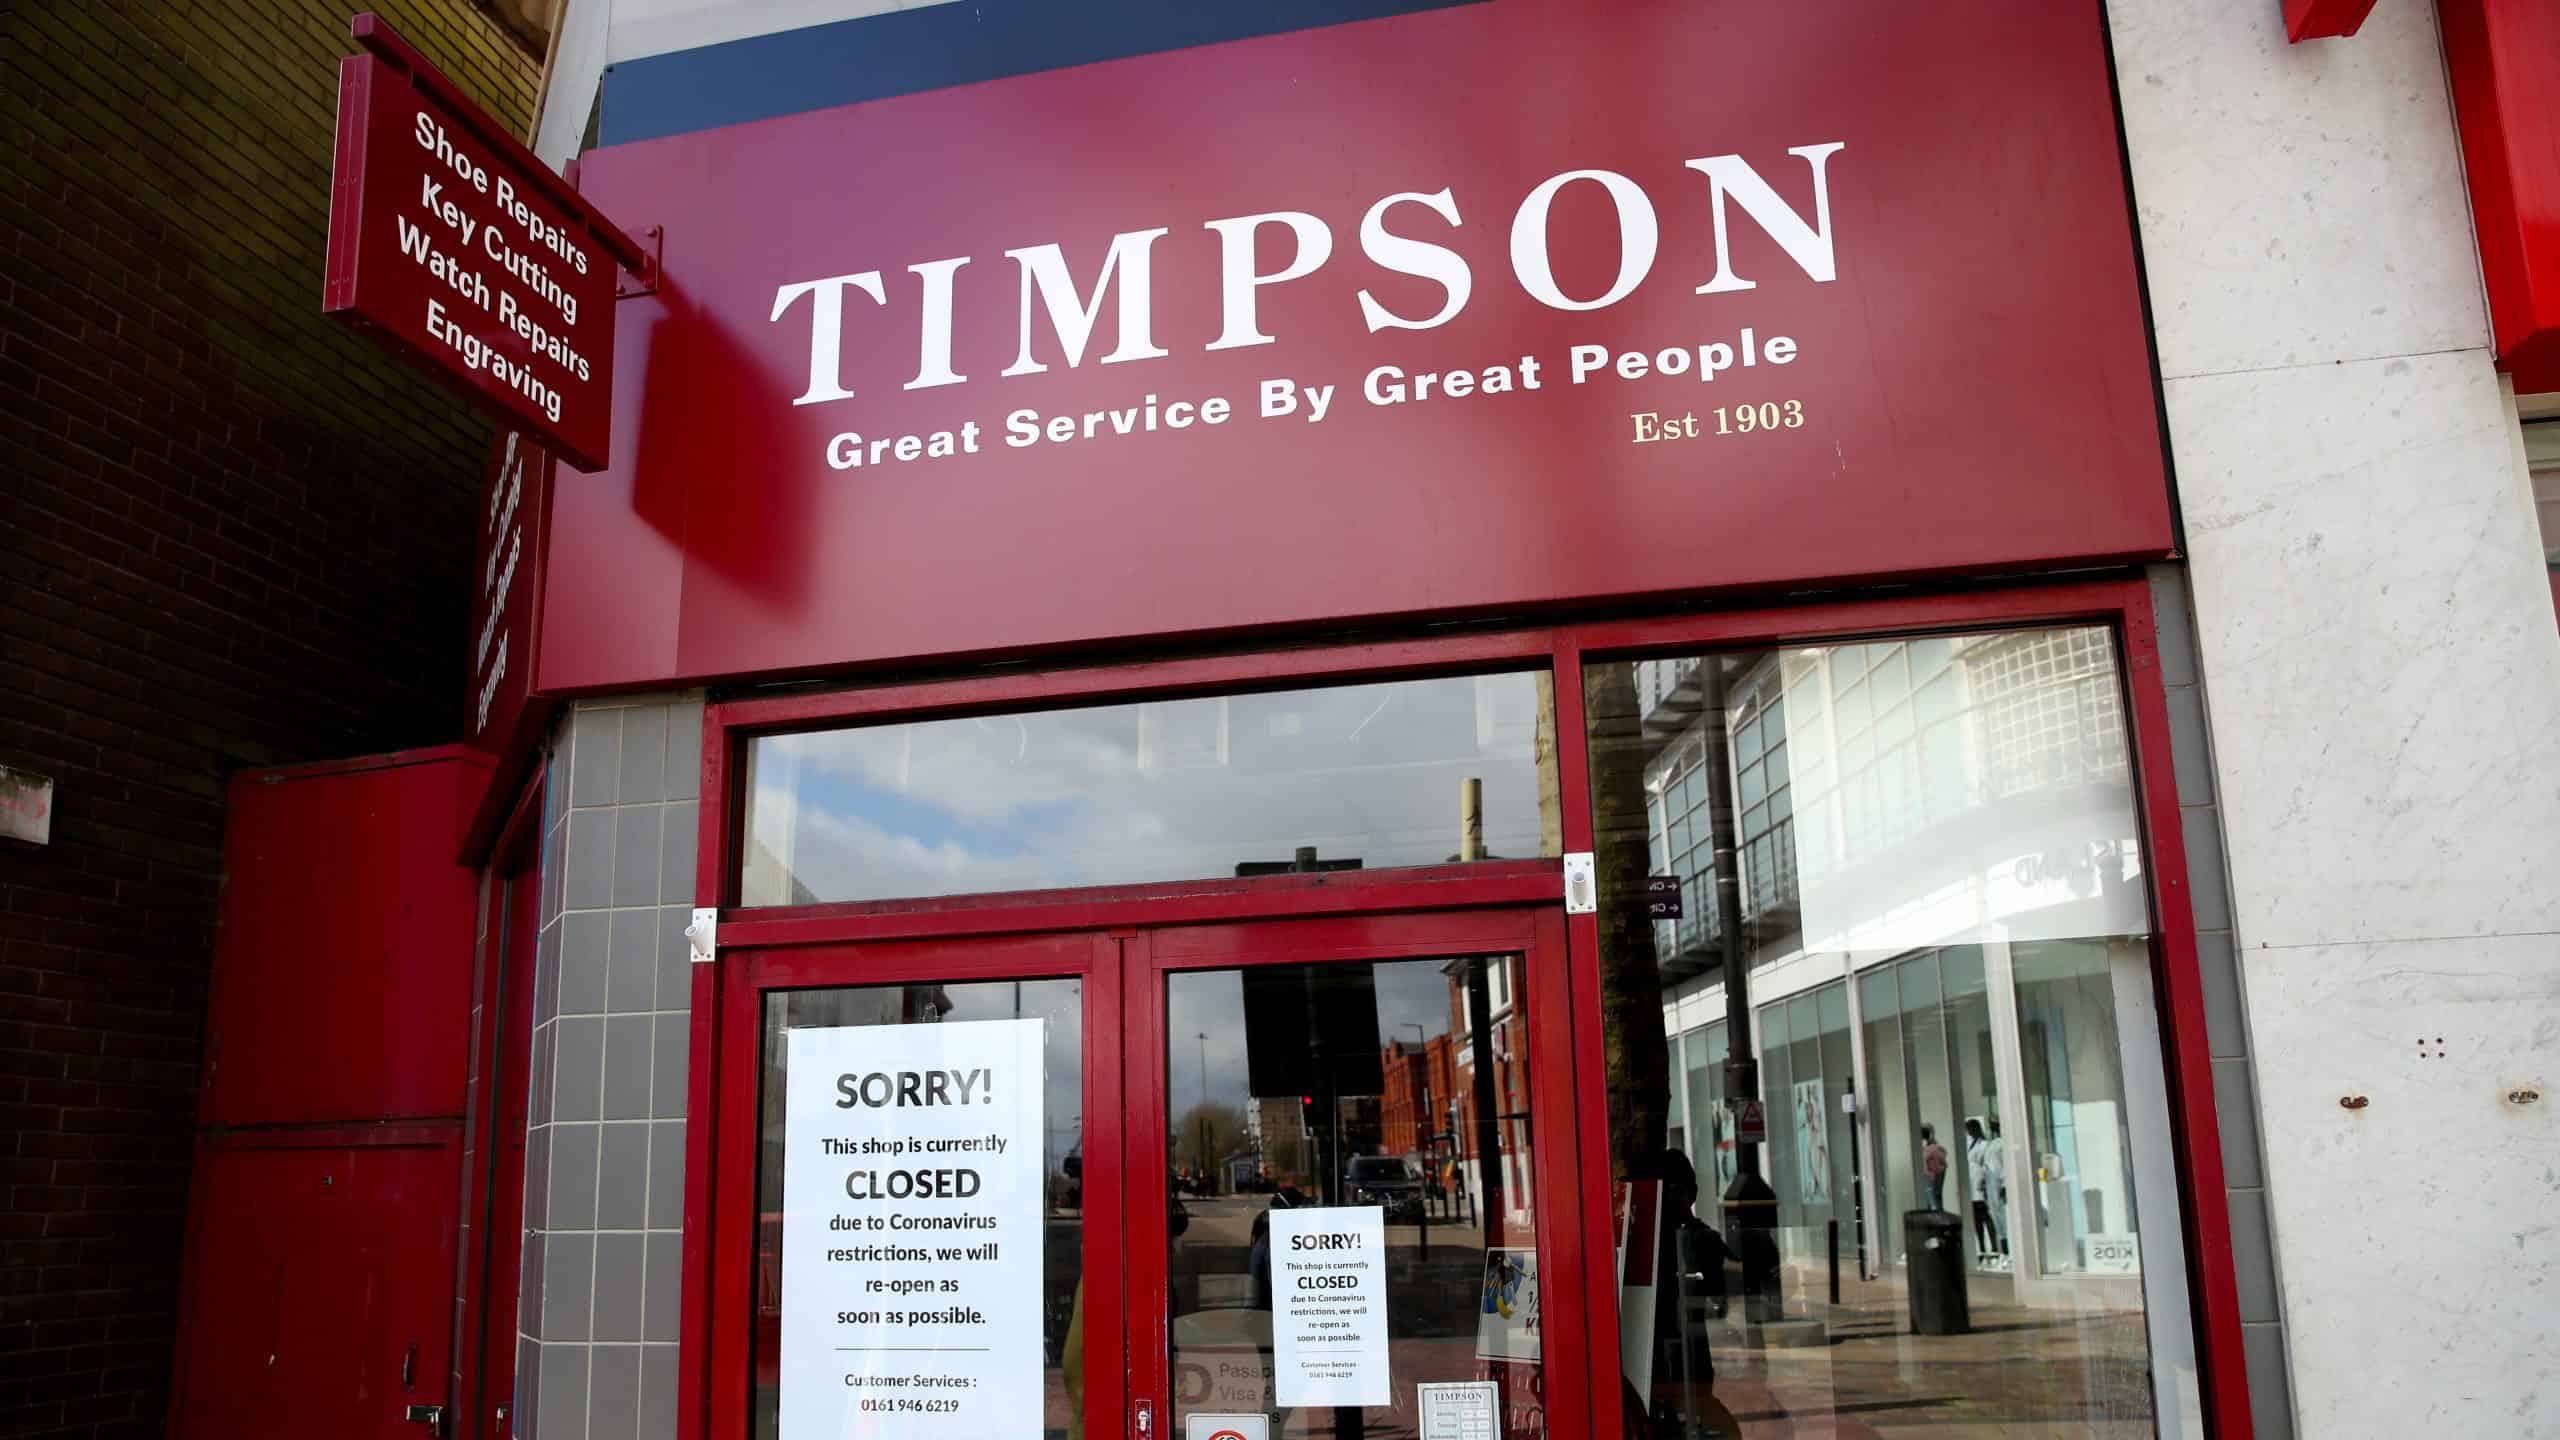 Timpson to cover HRT prescription costs for employees